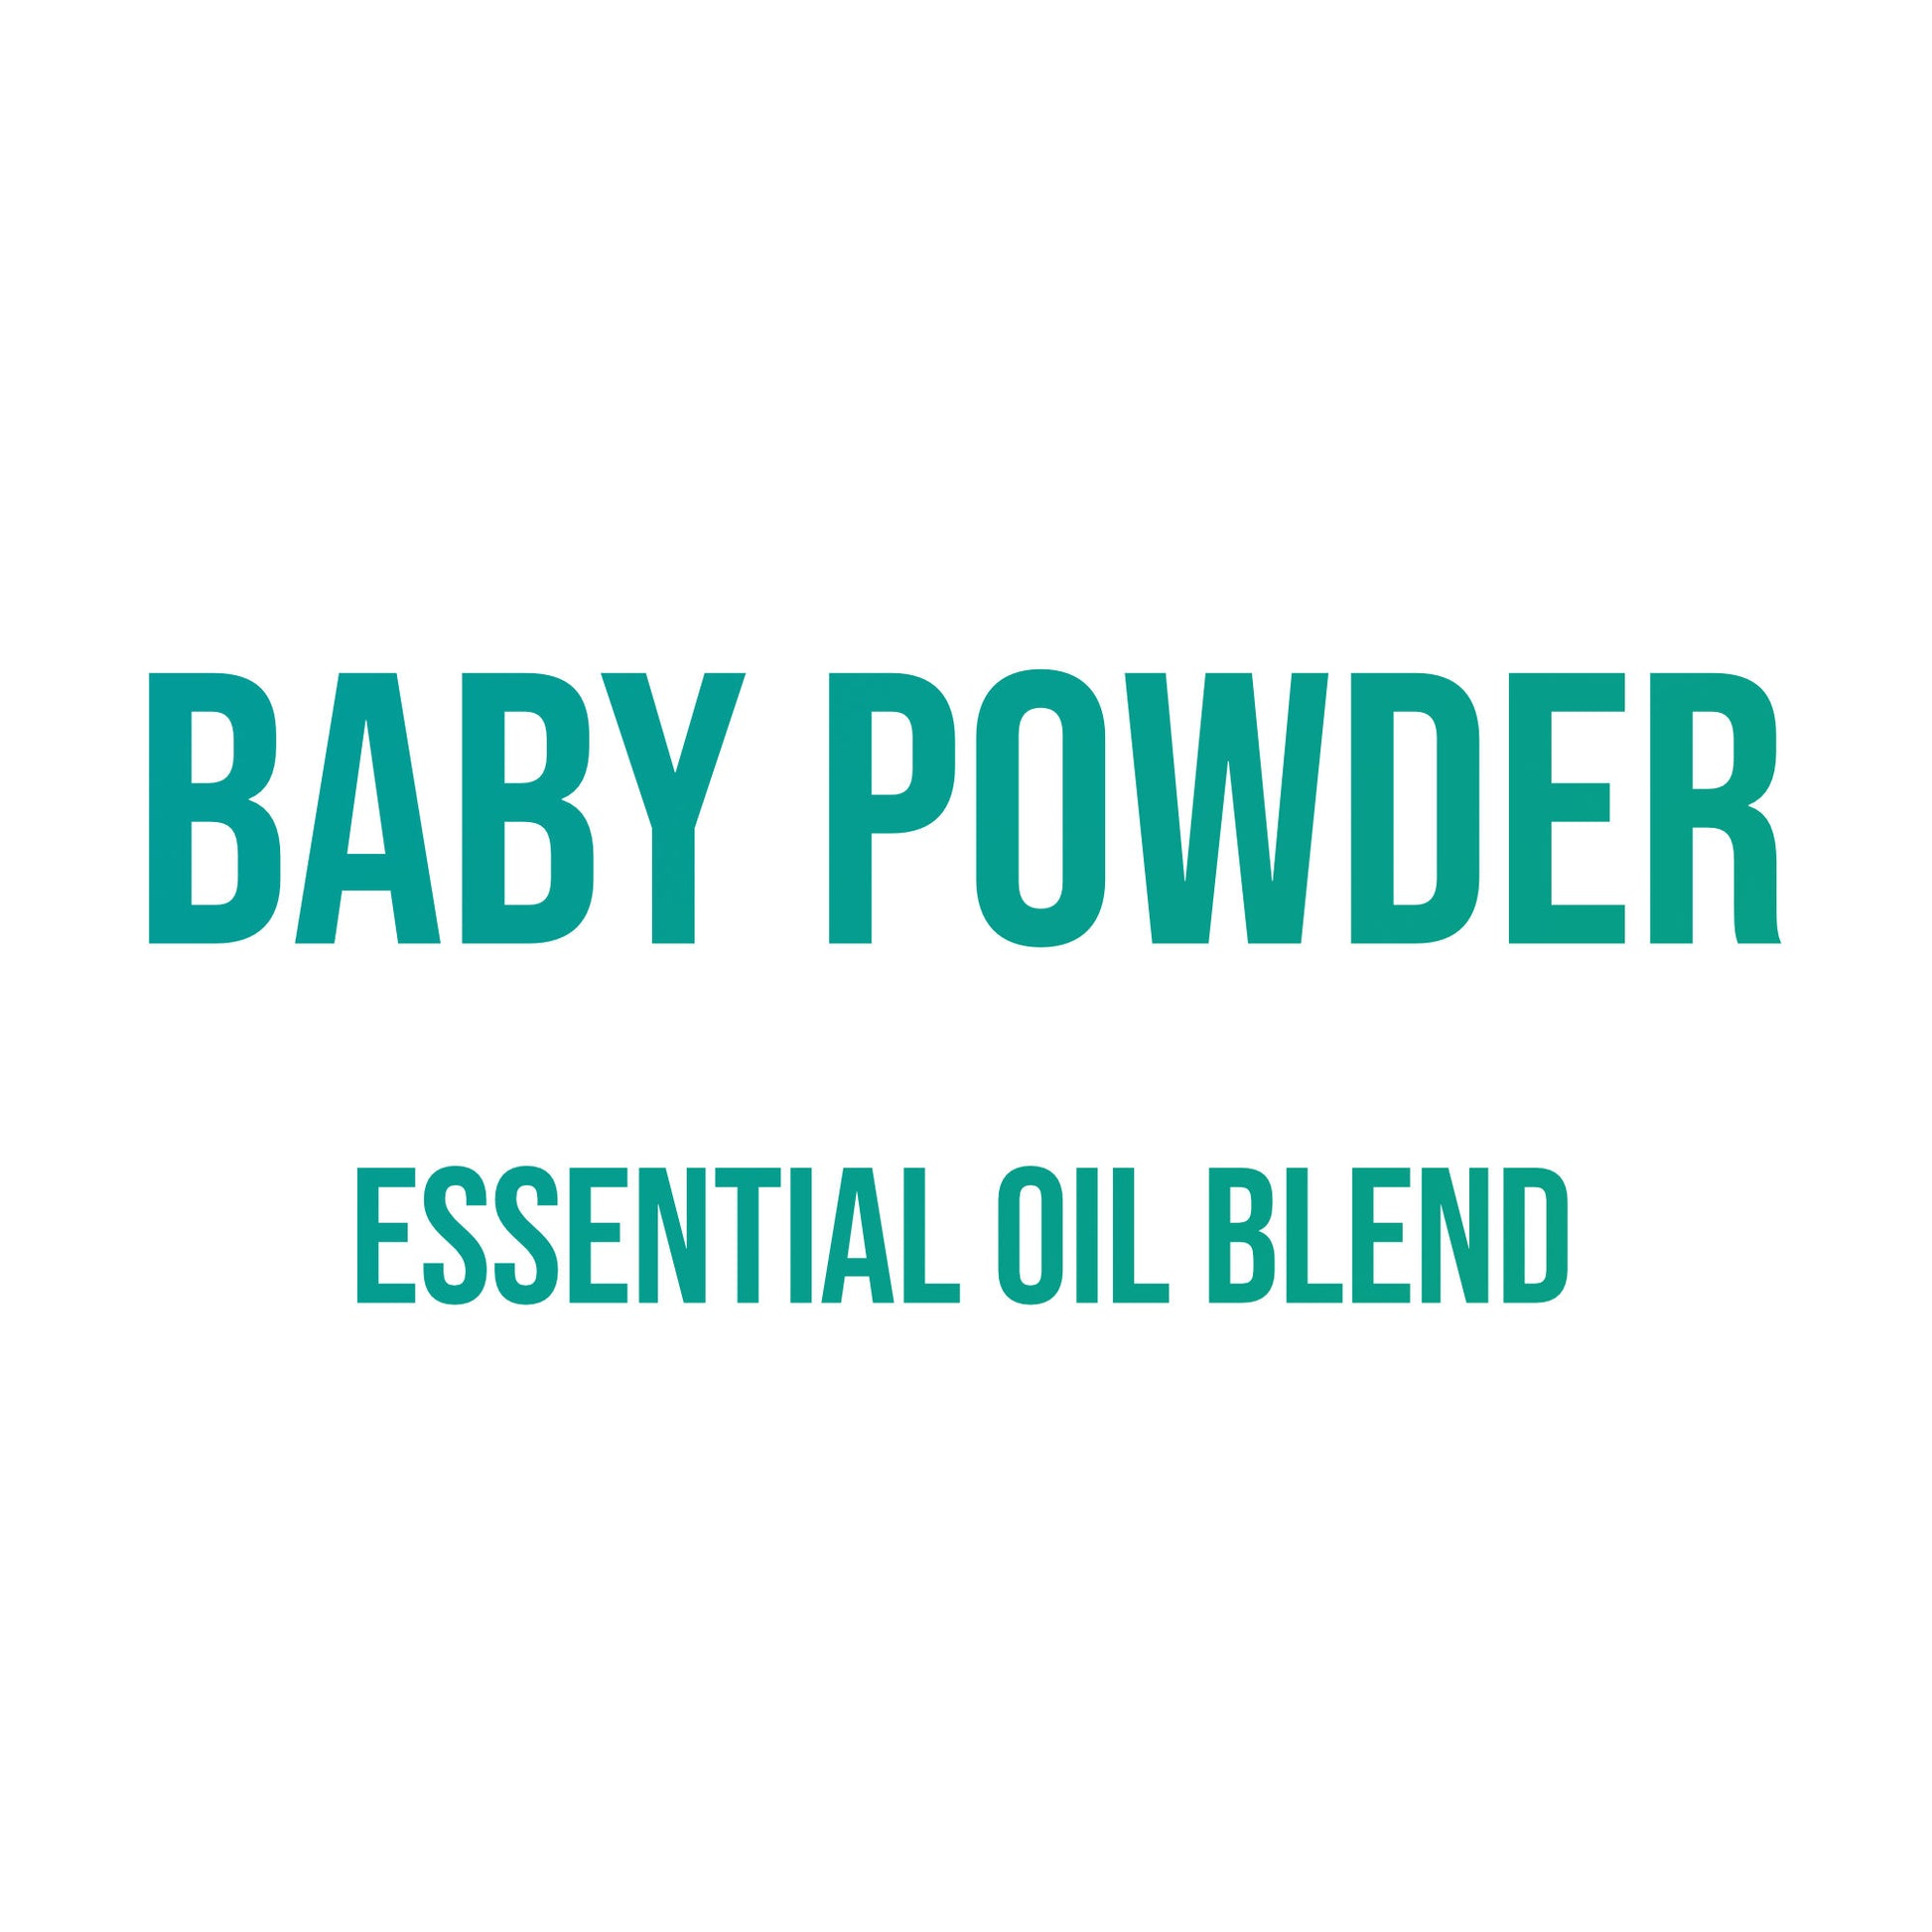 expressive scent scented home fragrance essential oil, baby powder 2 oz